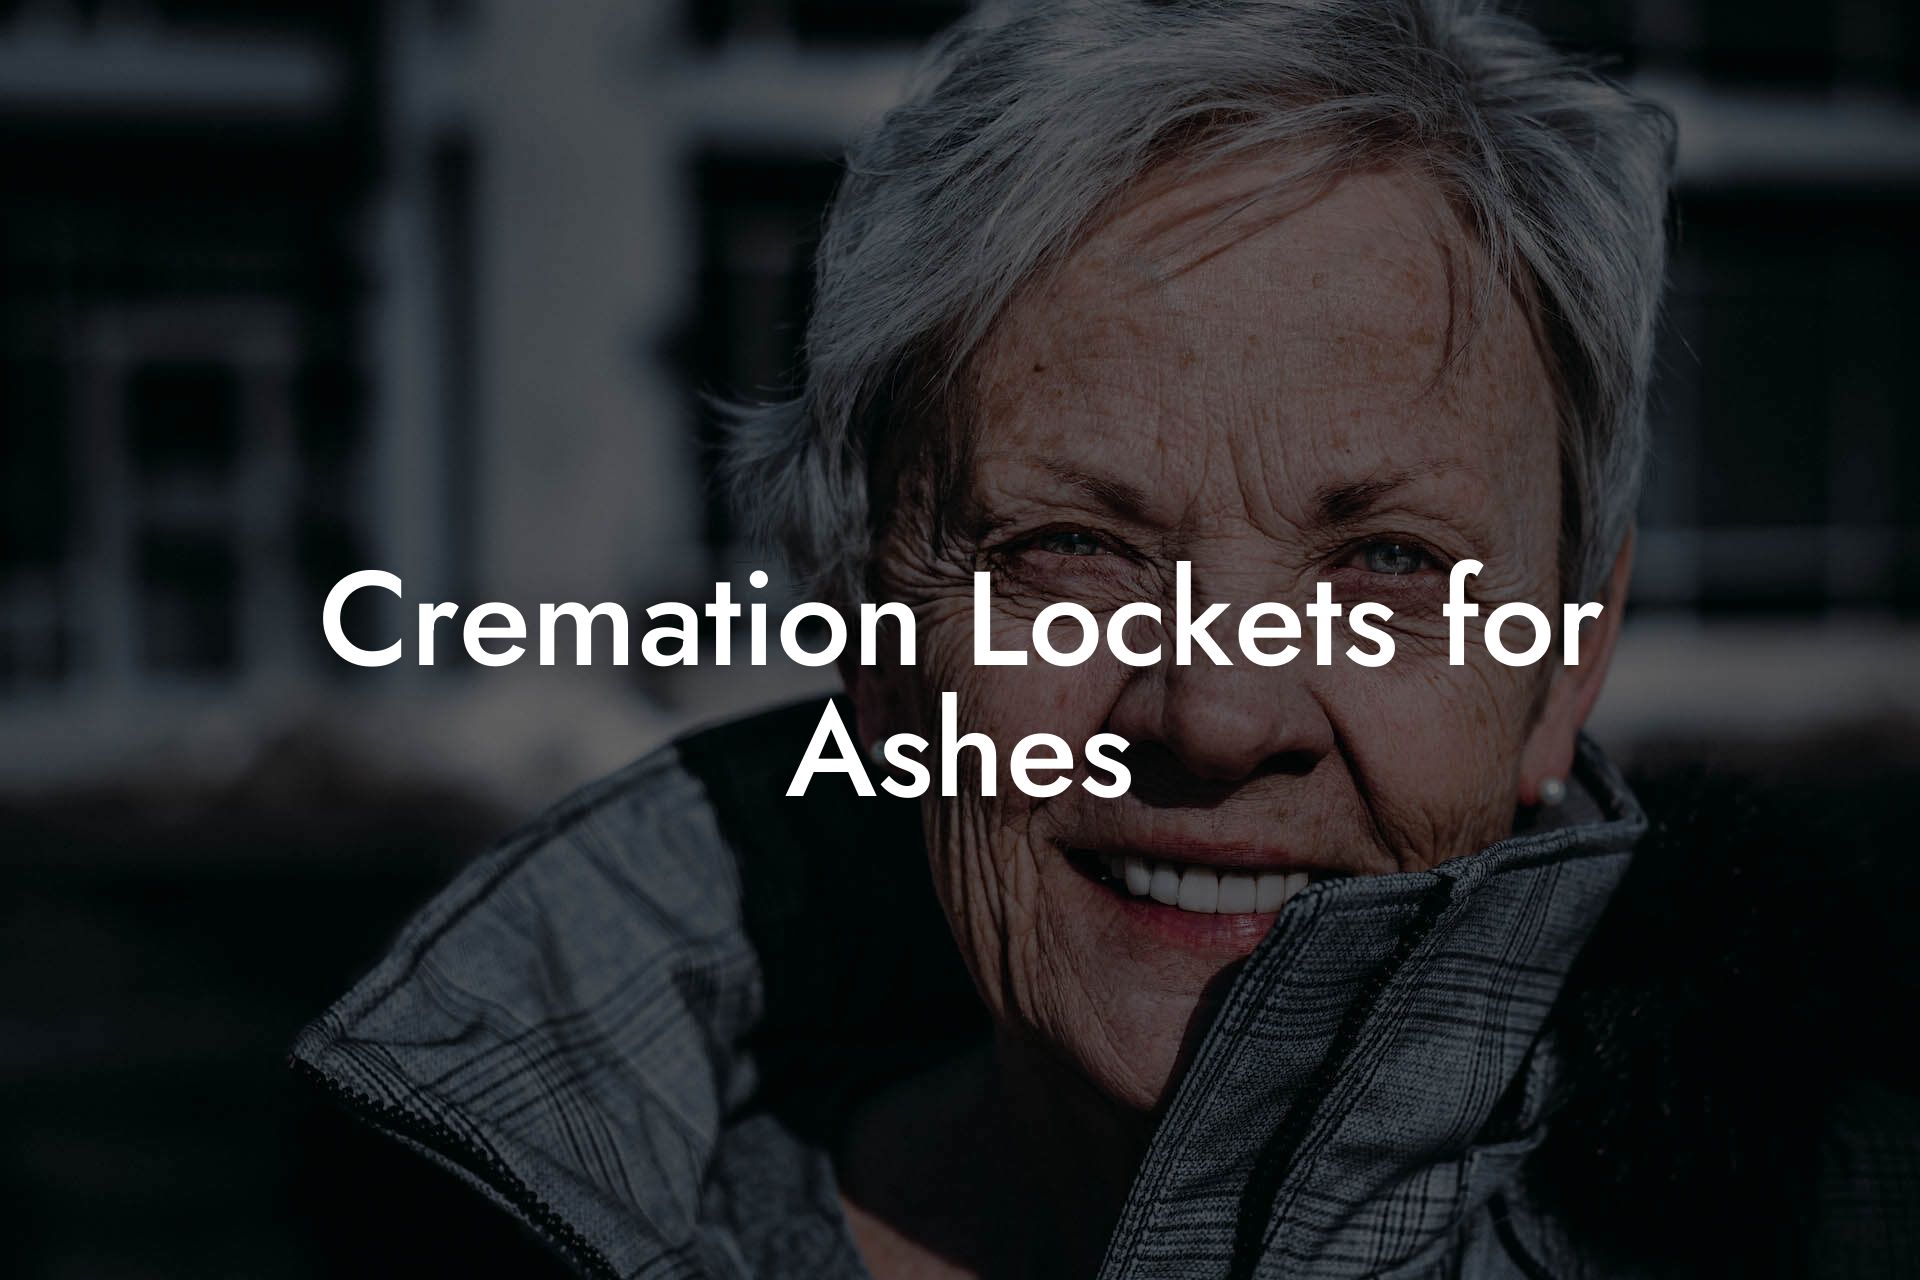 Cremation Lockets for Ashes